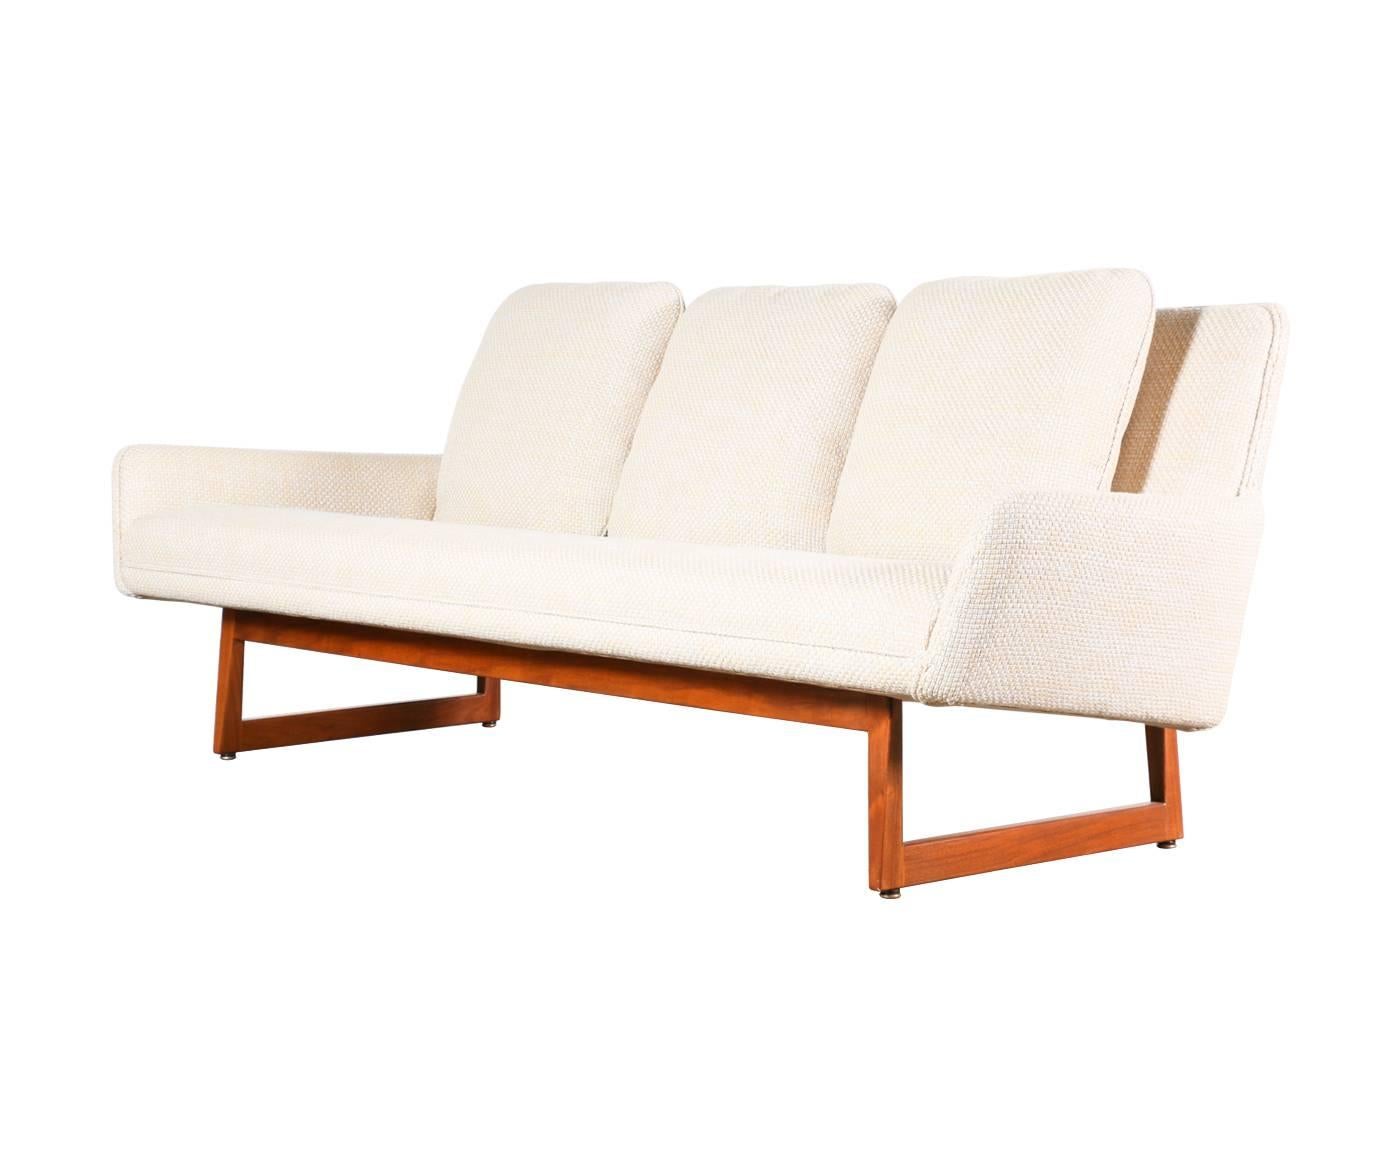 Designer: Jens Risom.
Manufacturer: Jens Risom design.
Period/Style: Mid-Century Modern.
Country: United States.
Date: 1960s.

Dimensions: 30.25″ H x 84.5″ L x 35″ W.
Materials: Walnut, cotton tweed.
Condition: Excellent, newly refinished